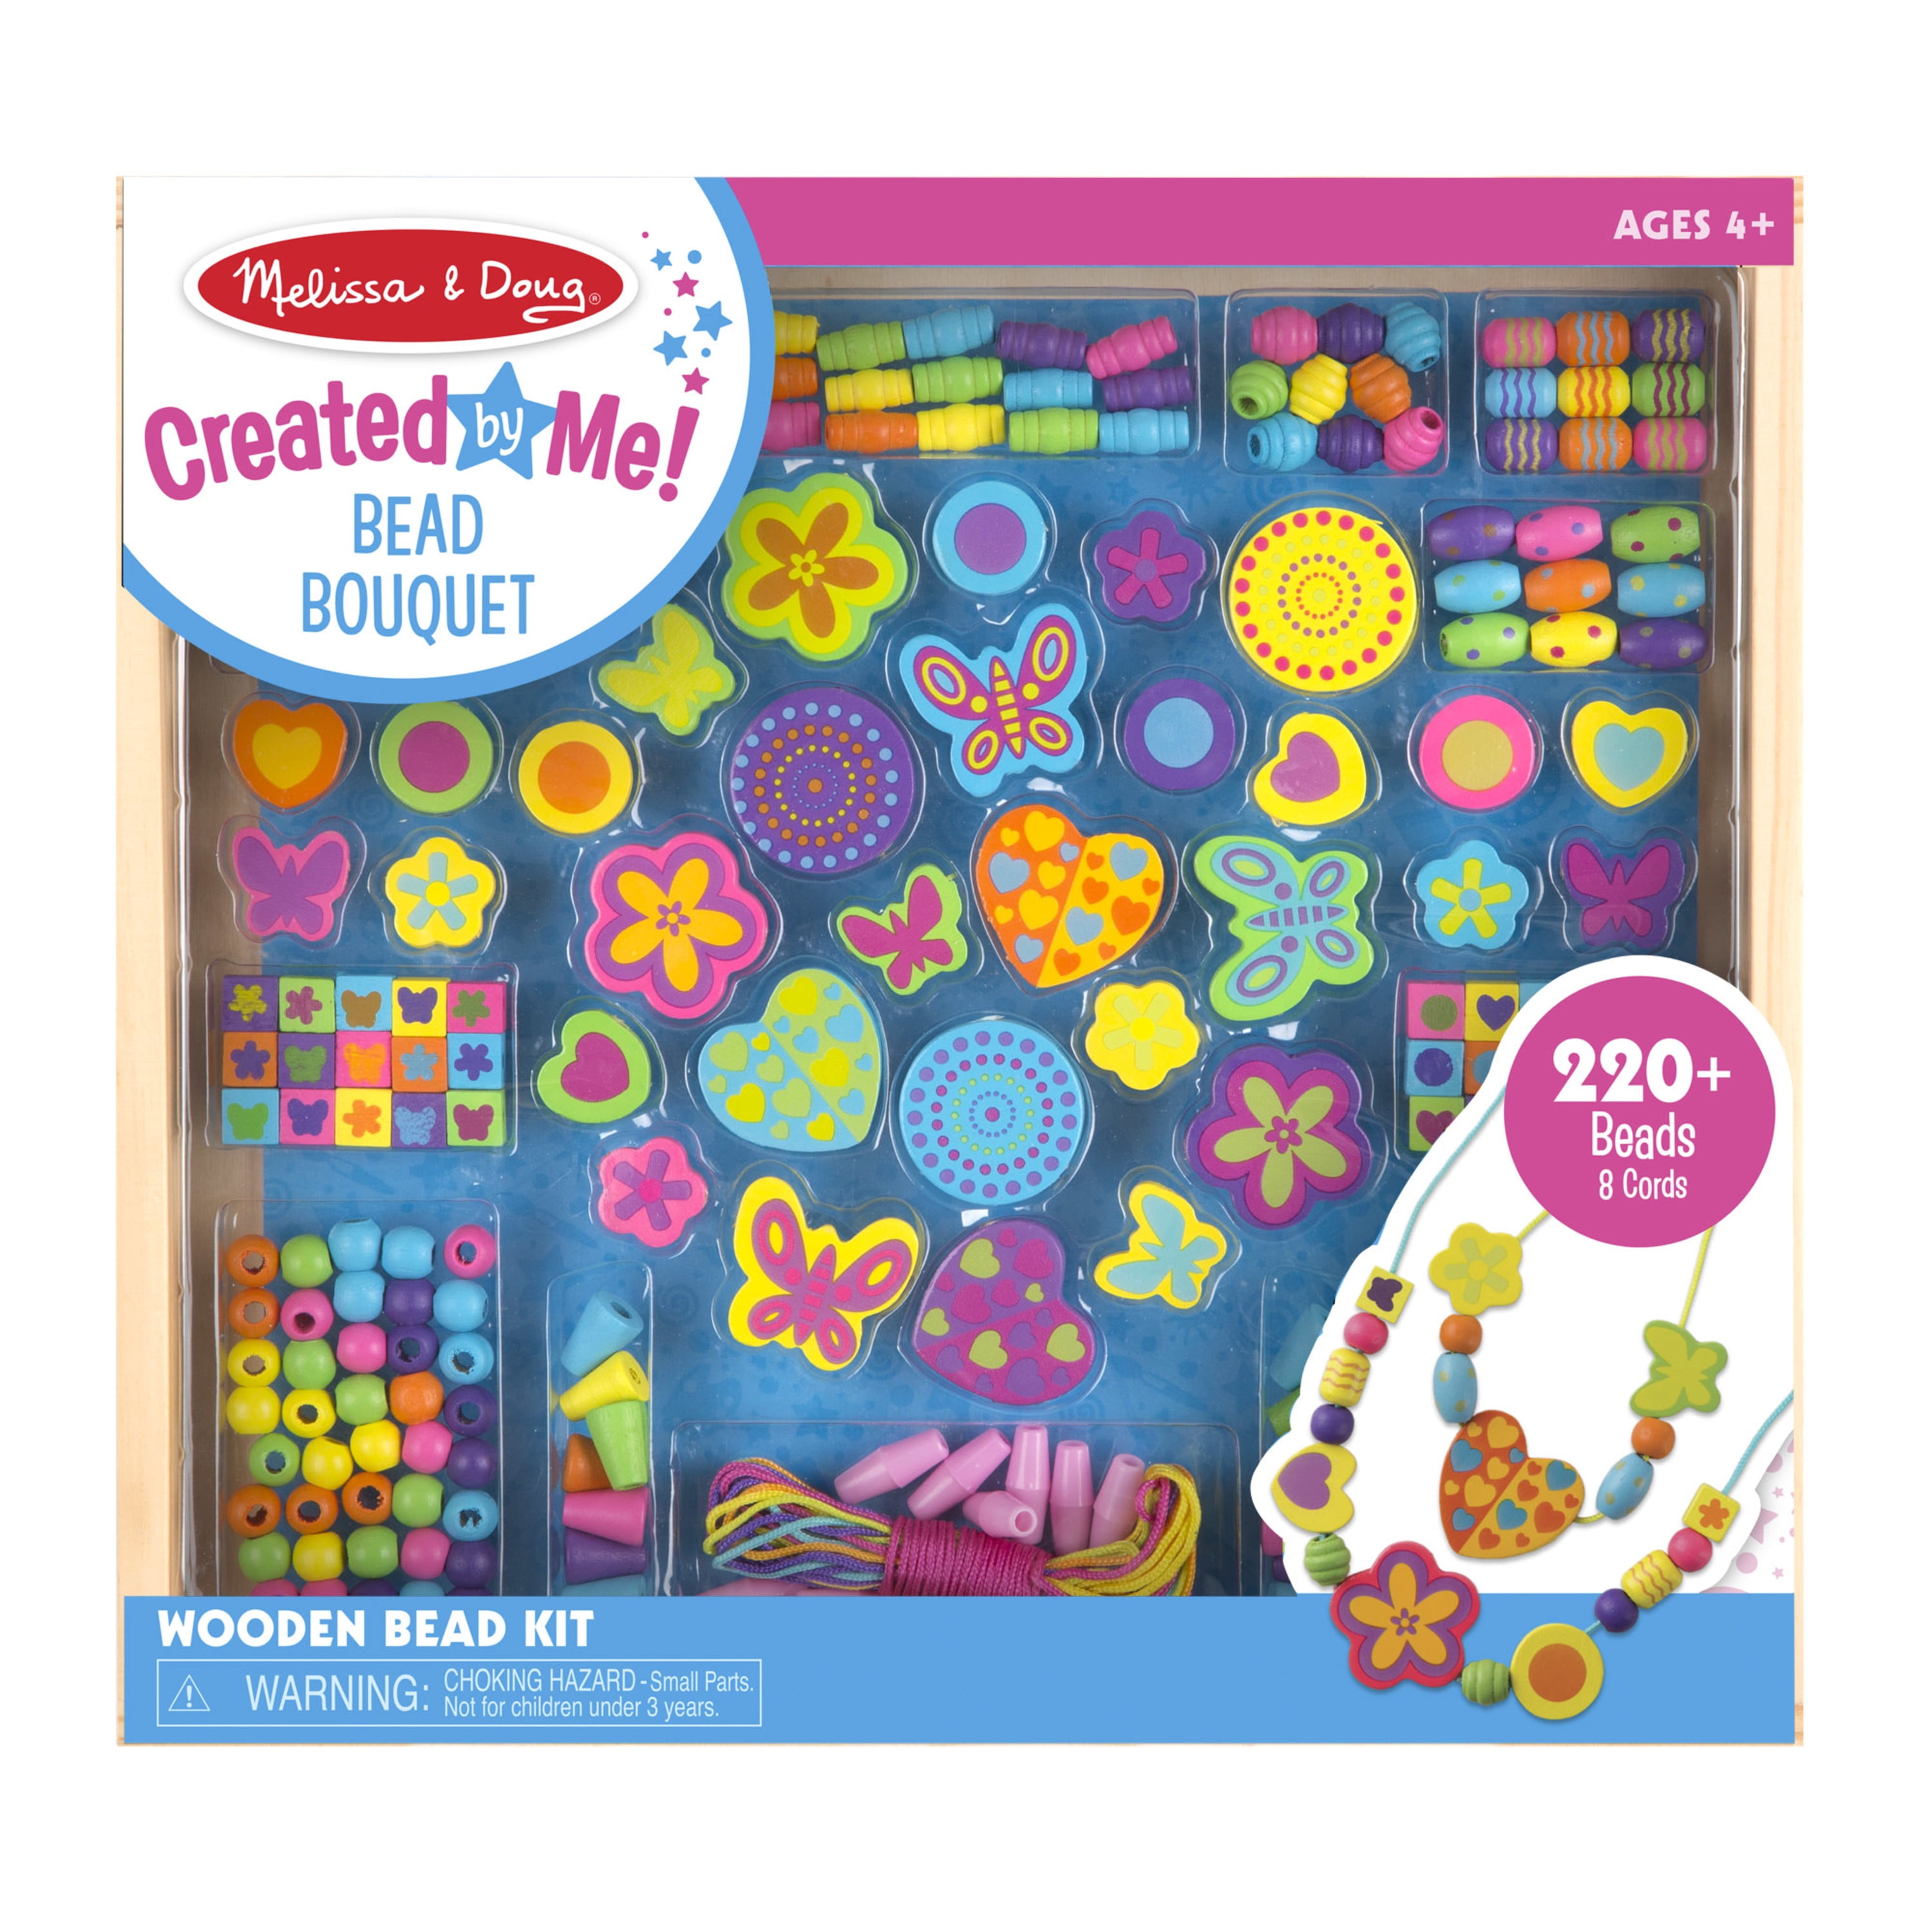  Melissa & Doug Created by Me! Heart Beads Wooden Bead Kit, 120+  Beads and 5 Cords for Jewelry-Making : Melissa & Doug: Toys & Games